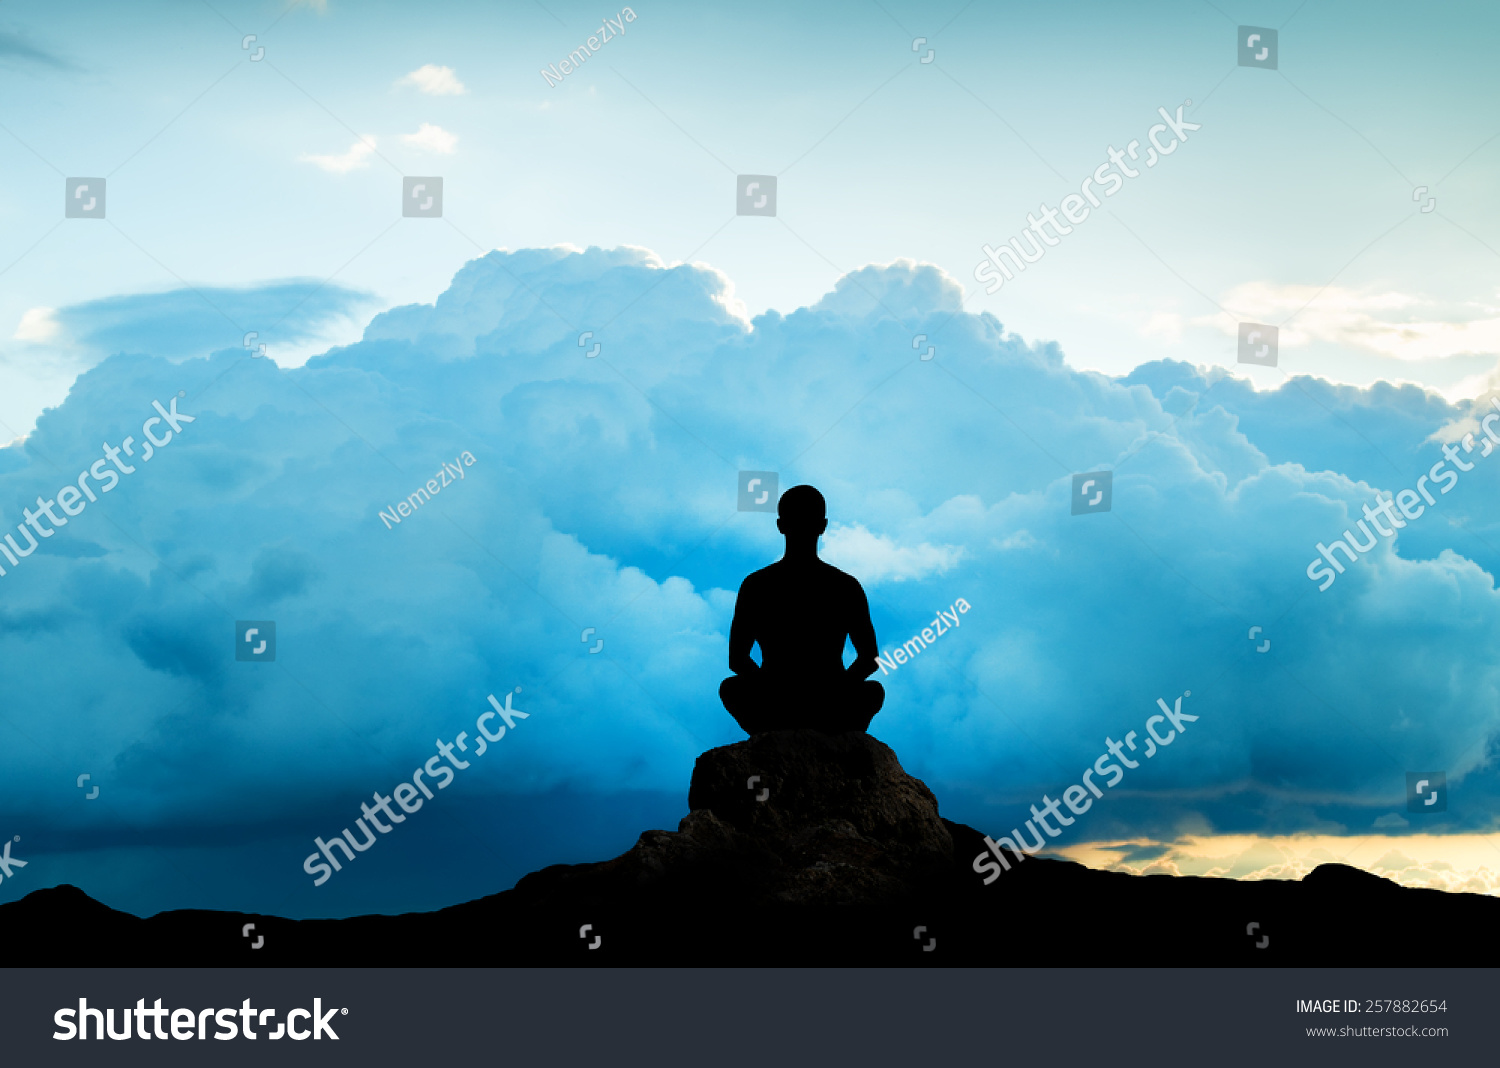 Silhouette of the meditating person against an approaching thunder-storm #257882654